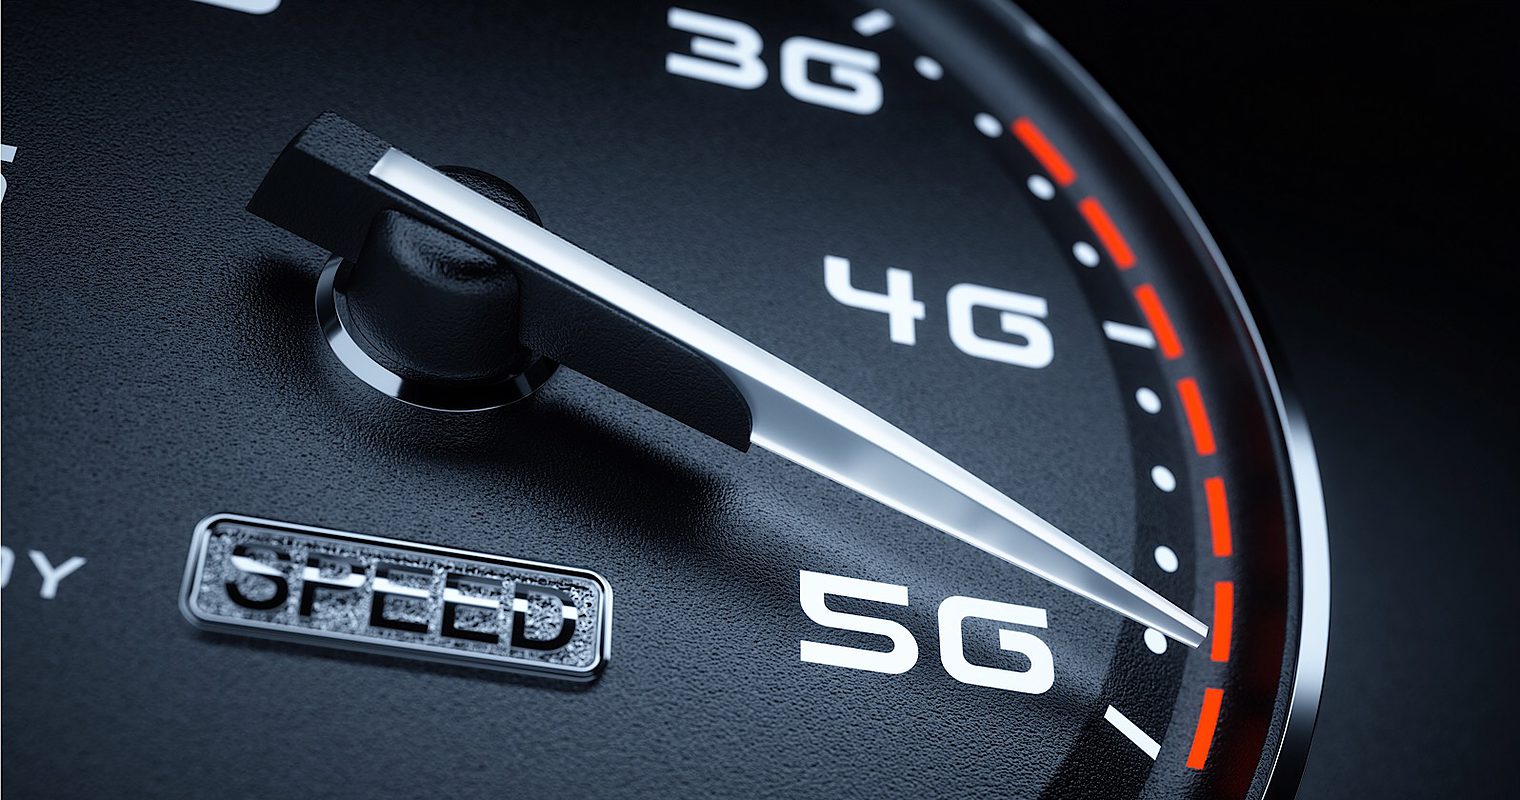 Google Mobile Speed Scorecard: Compare Your Speed Against Other Sites